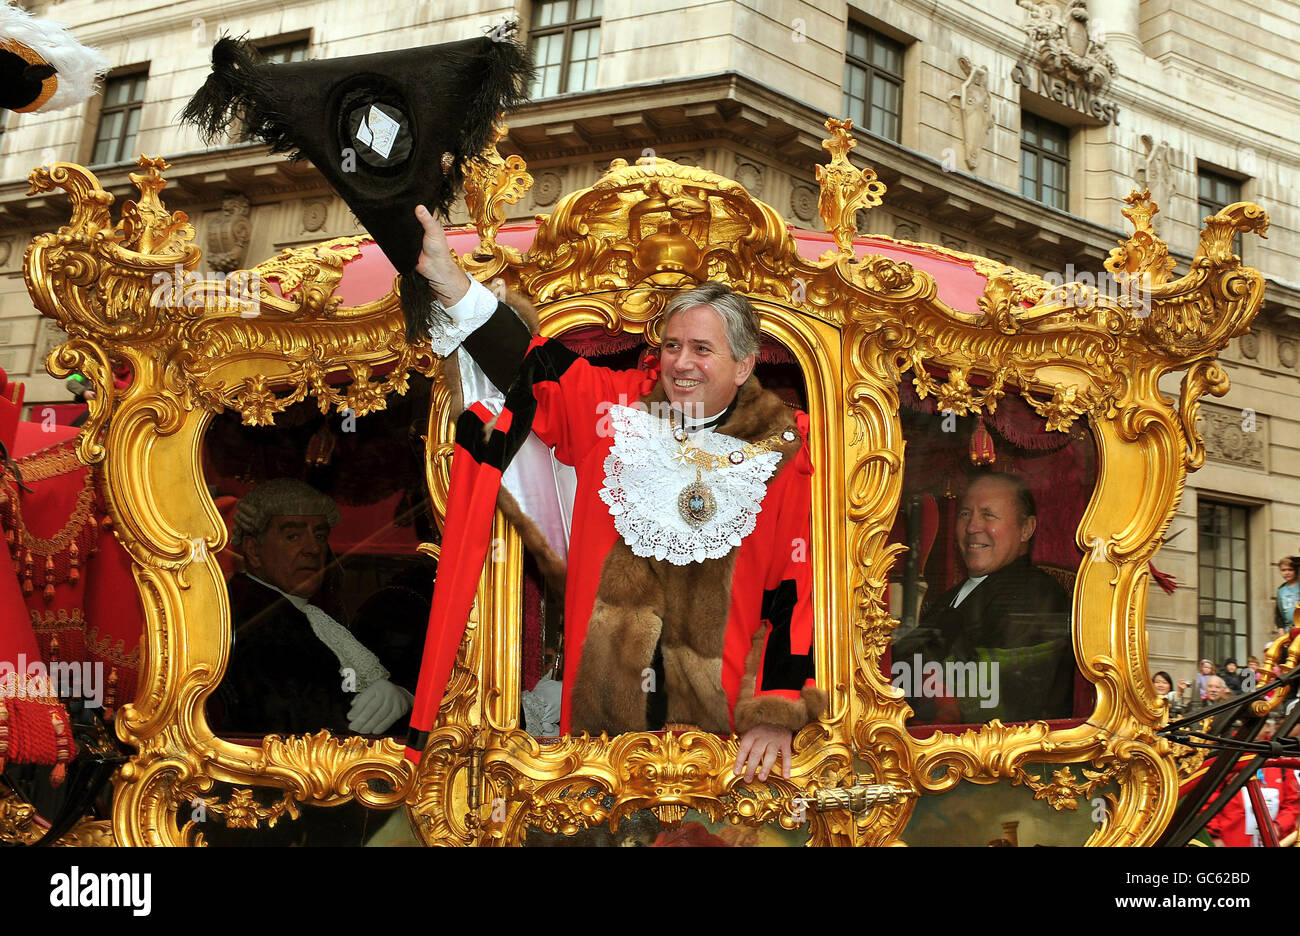 Customs and Traditions - The Lord Mayor's Show - London Stock Photo